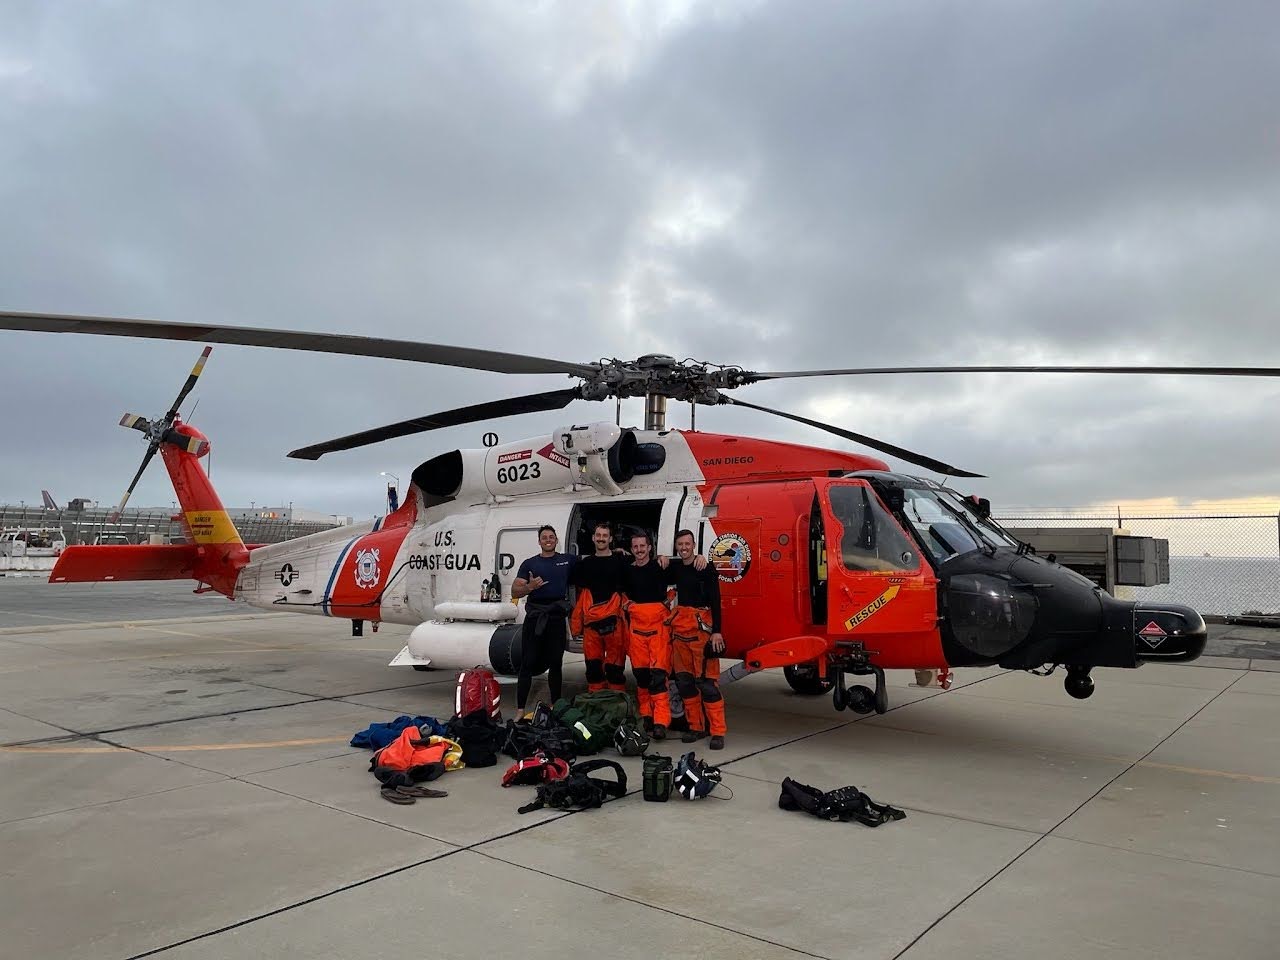 Coast Guard members Tyler Holt, Paul Junghans, Liam Otto and Joel Sprowls pose for a photo at Coast Guard Air Station San Francisco on August 17, 2021.